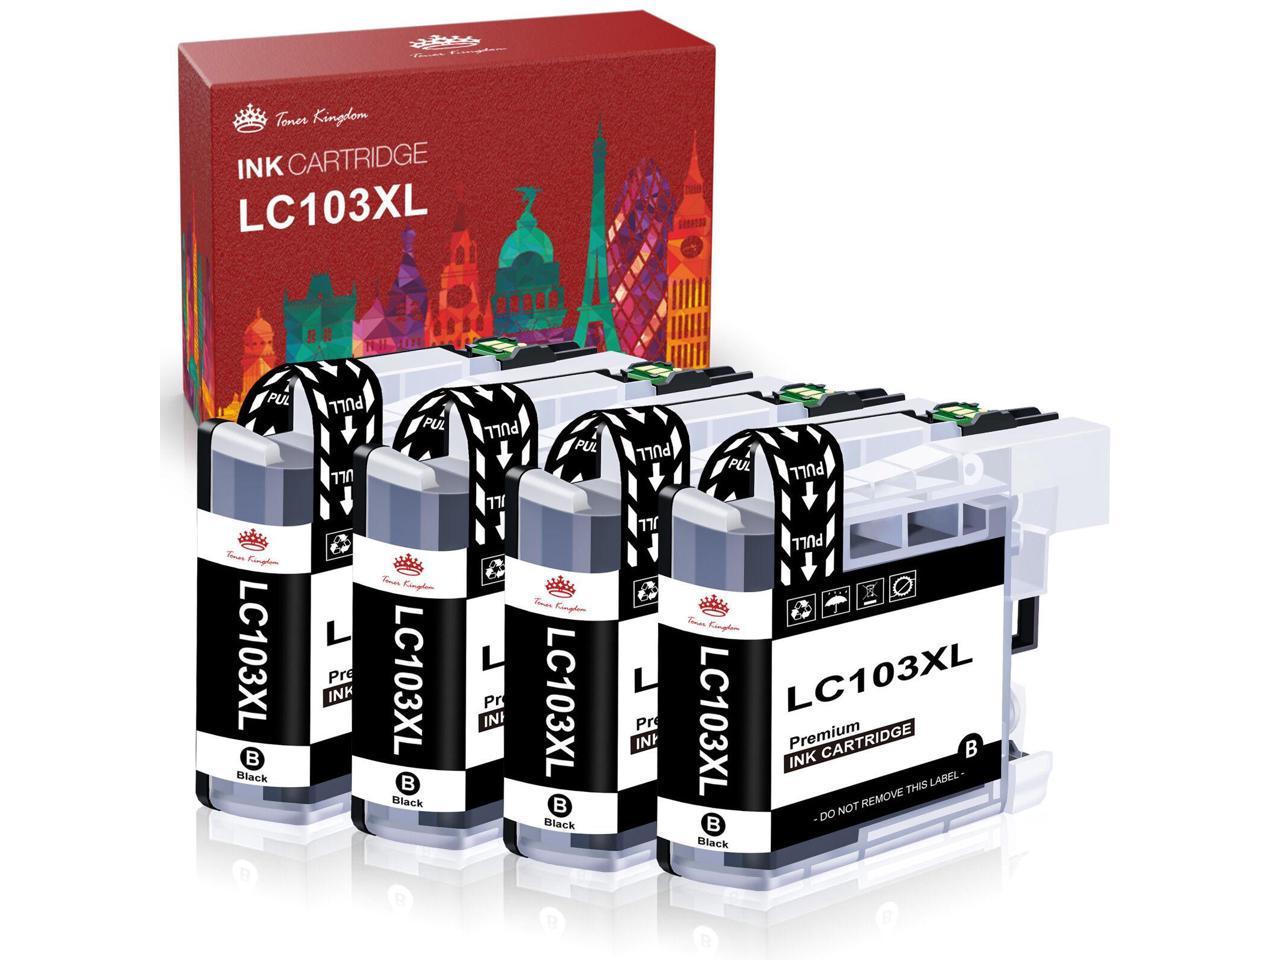 48pk LC203XL LC-203XL Ink Cartridges For Brother MFC-J460dw MFC-J480dw J4620DW 